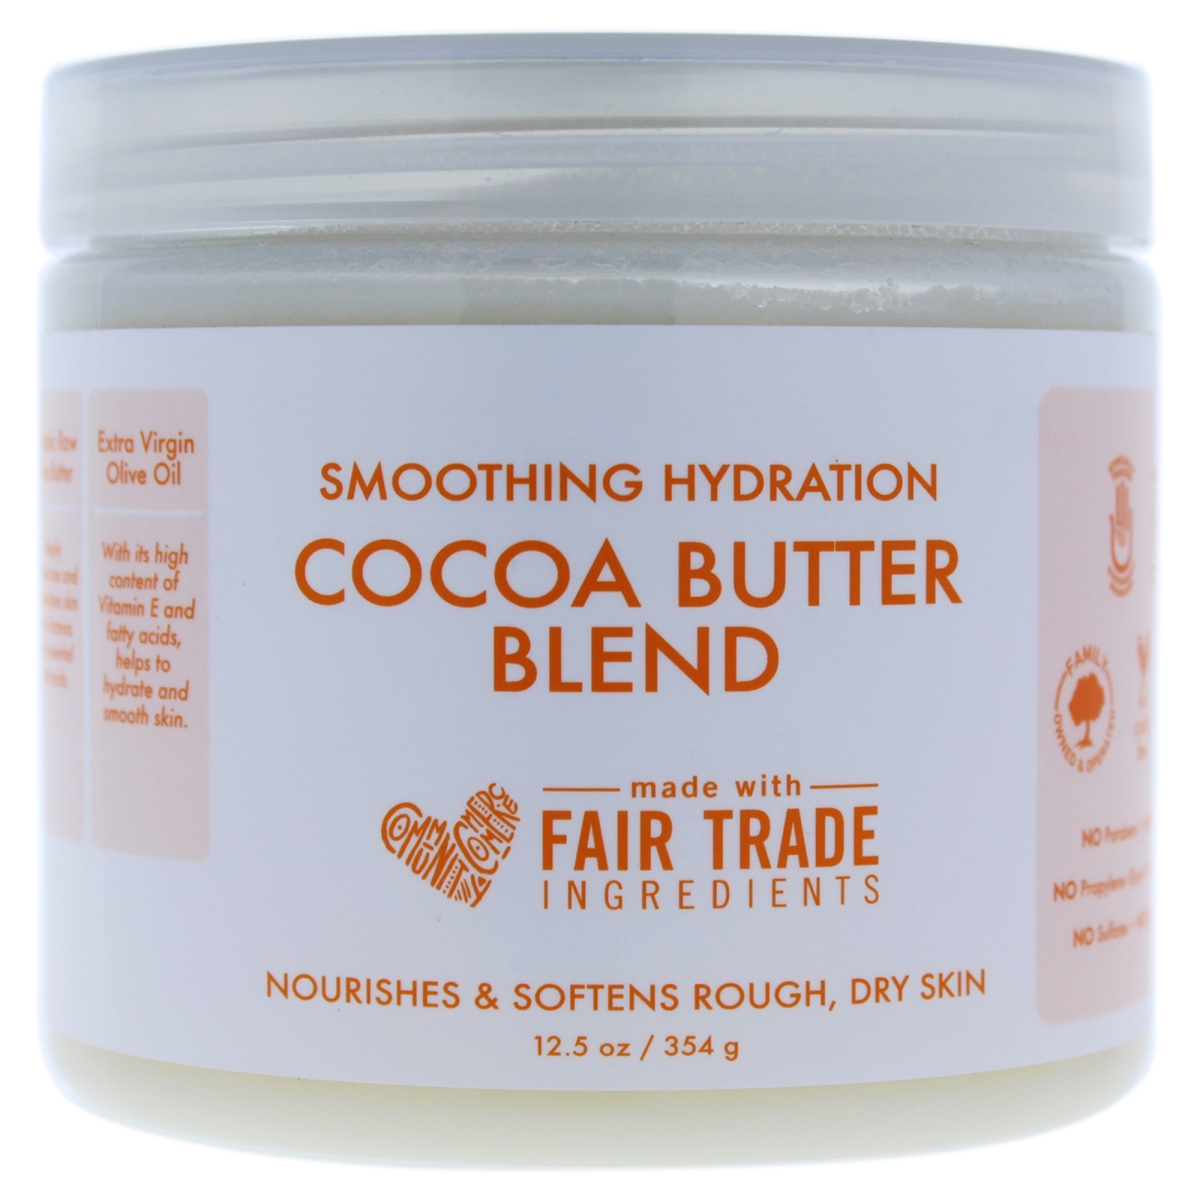 I0084716 Smoothing Hydration Cocoa Butter Blend Body Cream For Unisex - 12.5 Oz